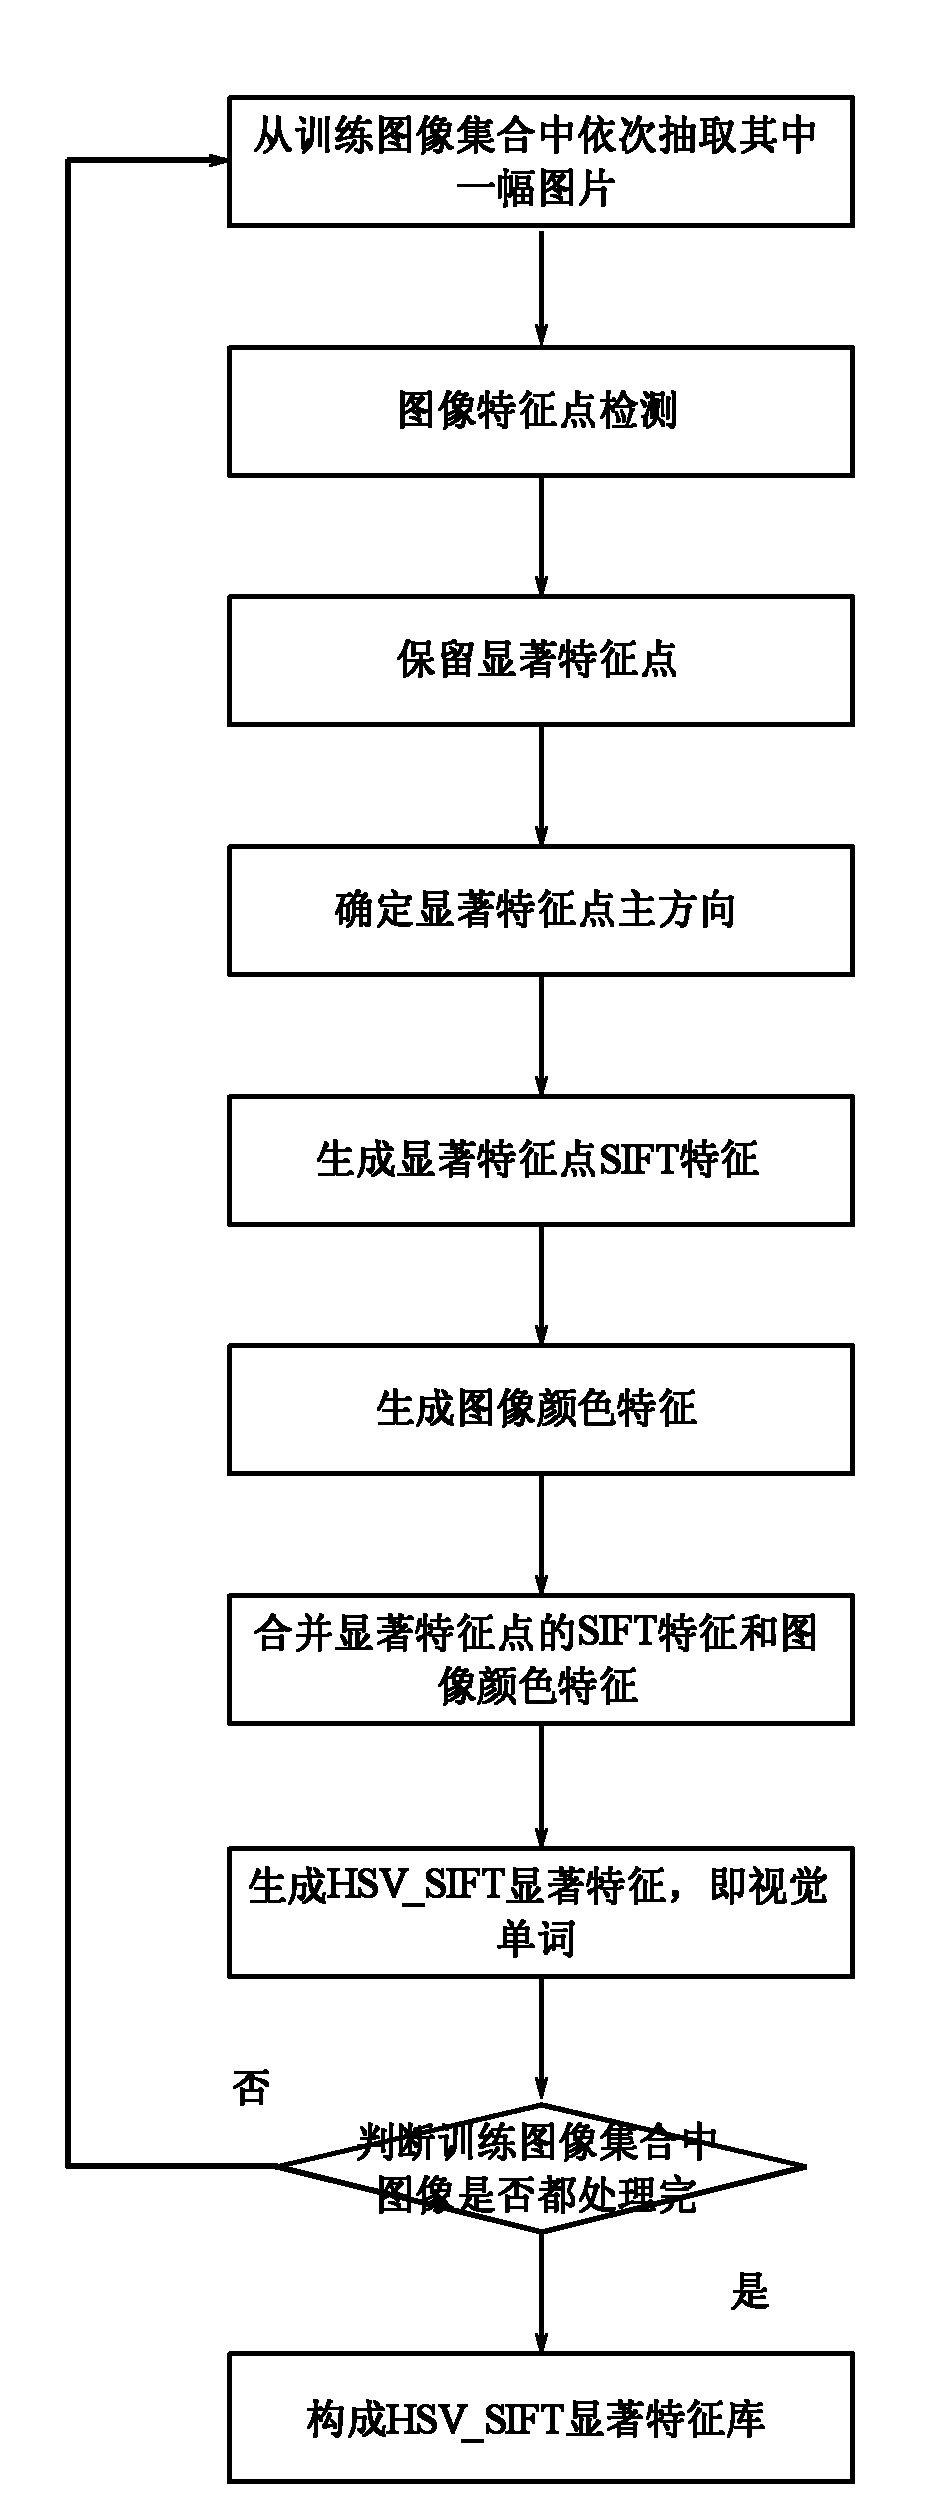 Probabilistic latent semantic model object image recognition method with fusion of significant characteristic of color